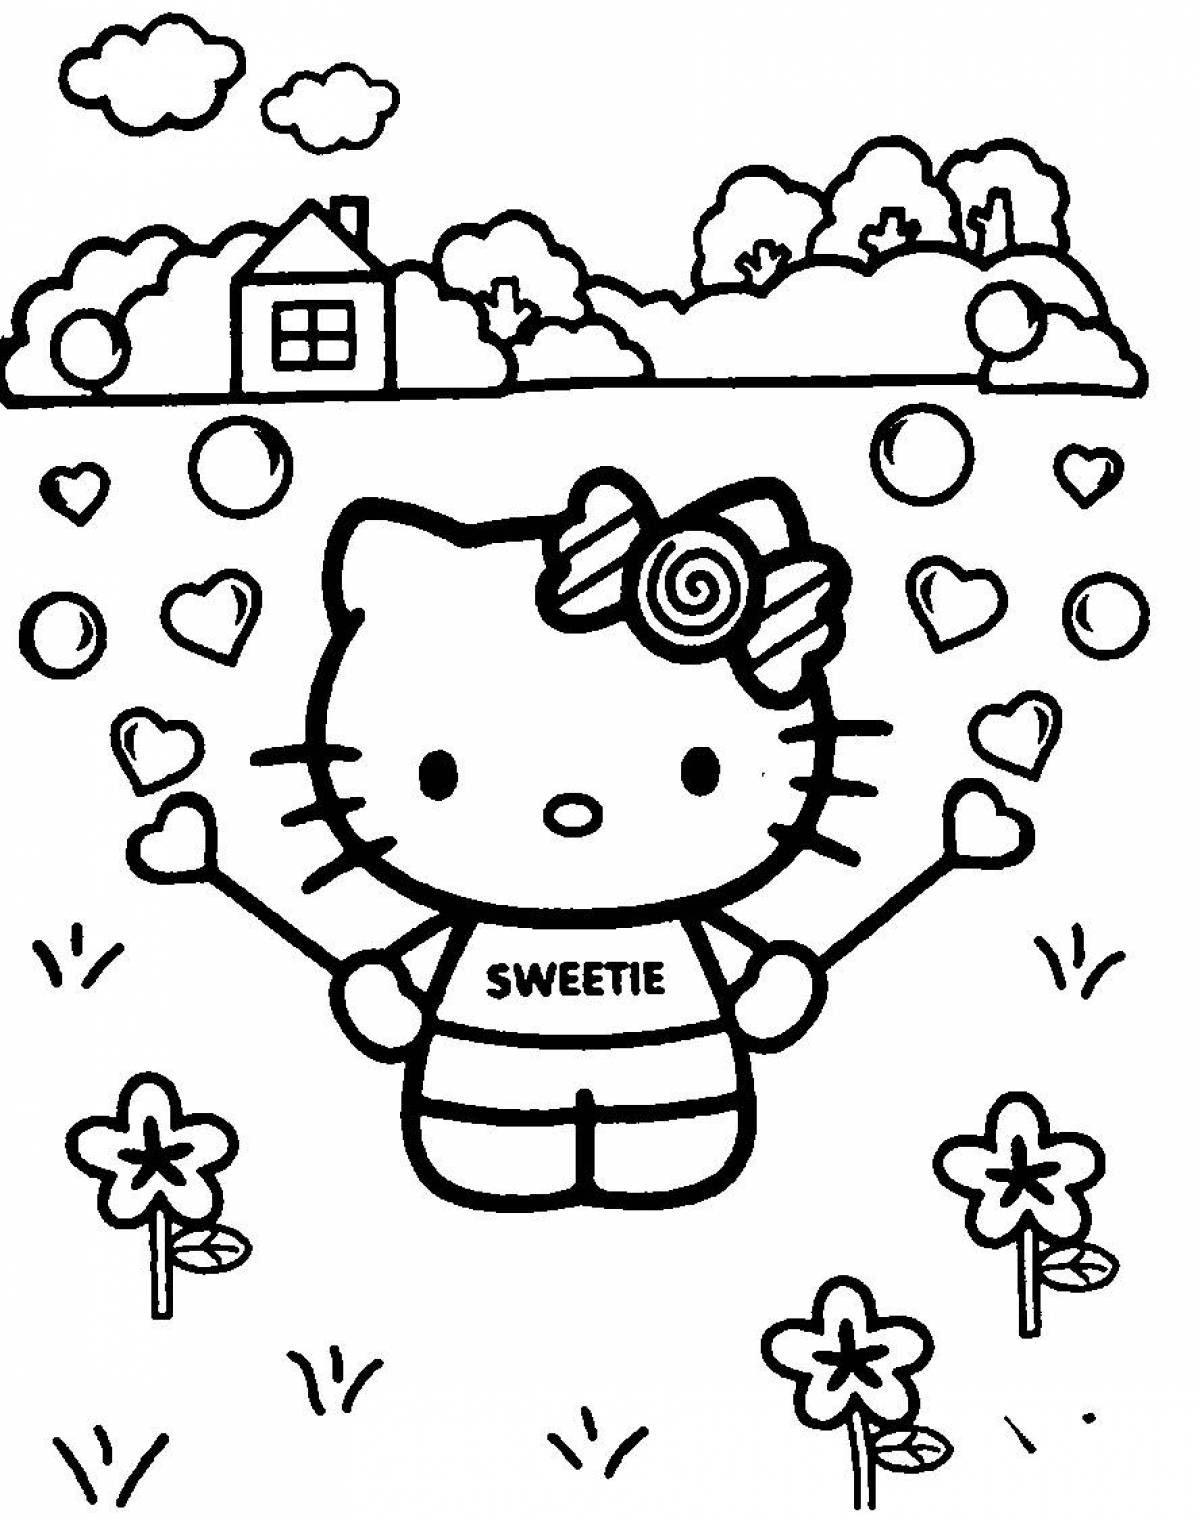 Outstanding hello kitty coloring page